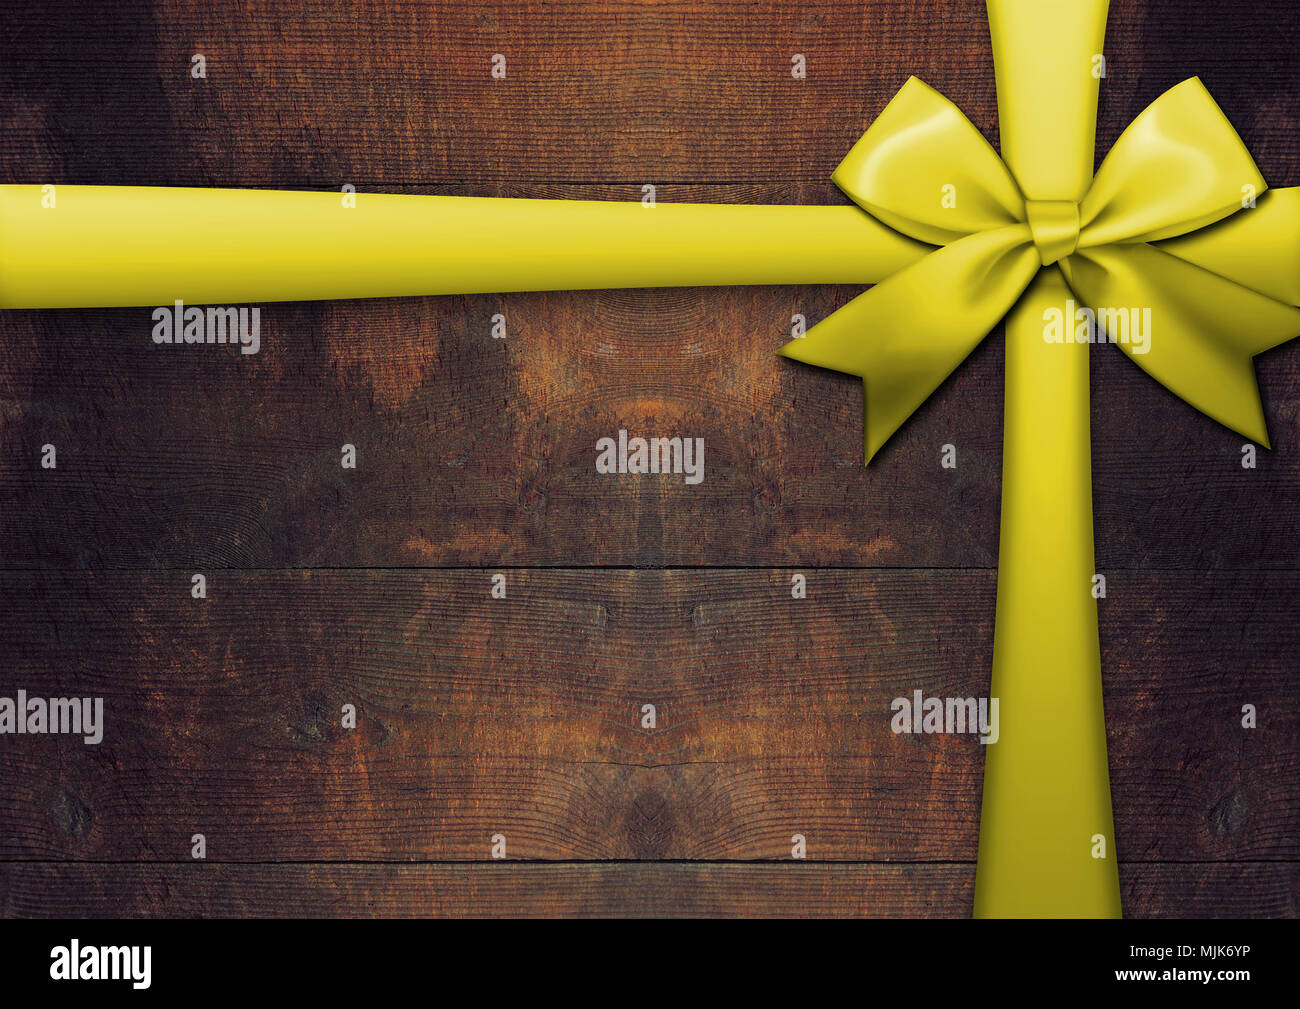 Stock Illustration - Wood Board, Yellow Ribbon and Bow, 3D Illustration, Wood Background, Copy Space. Stock Photo